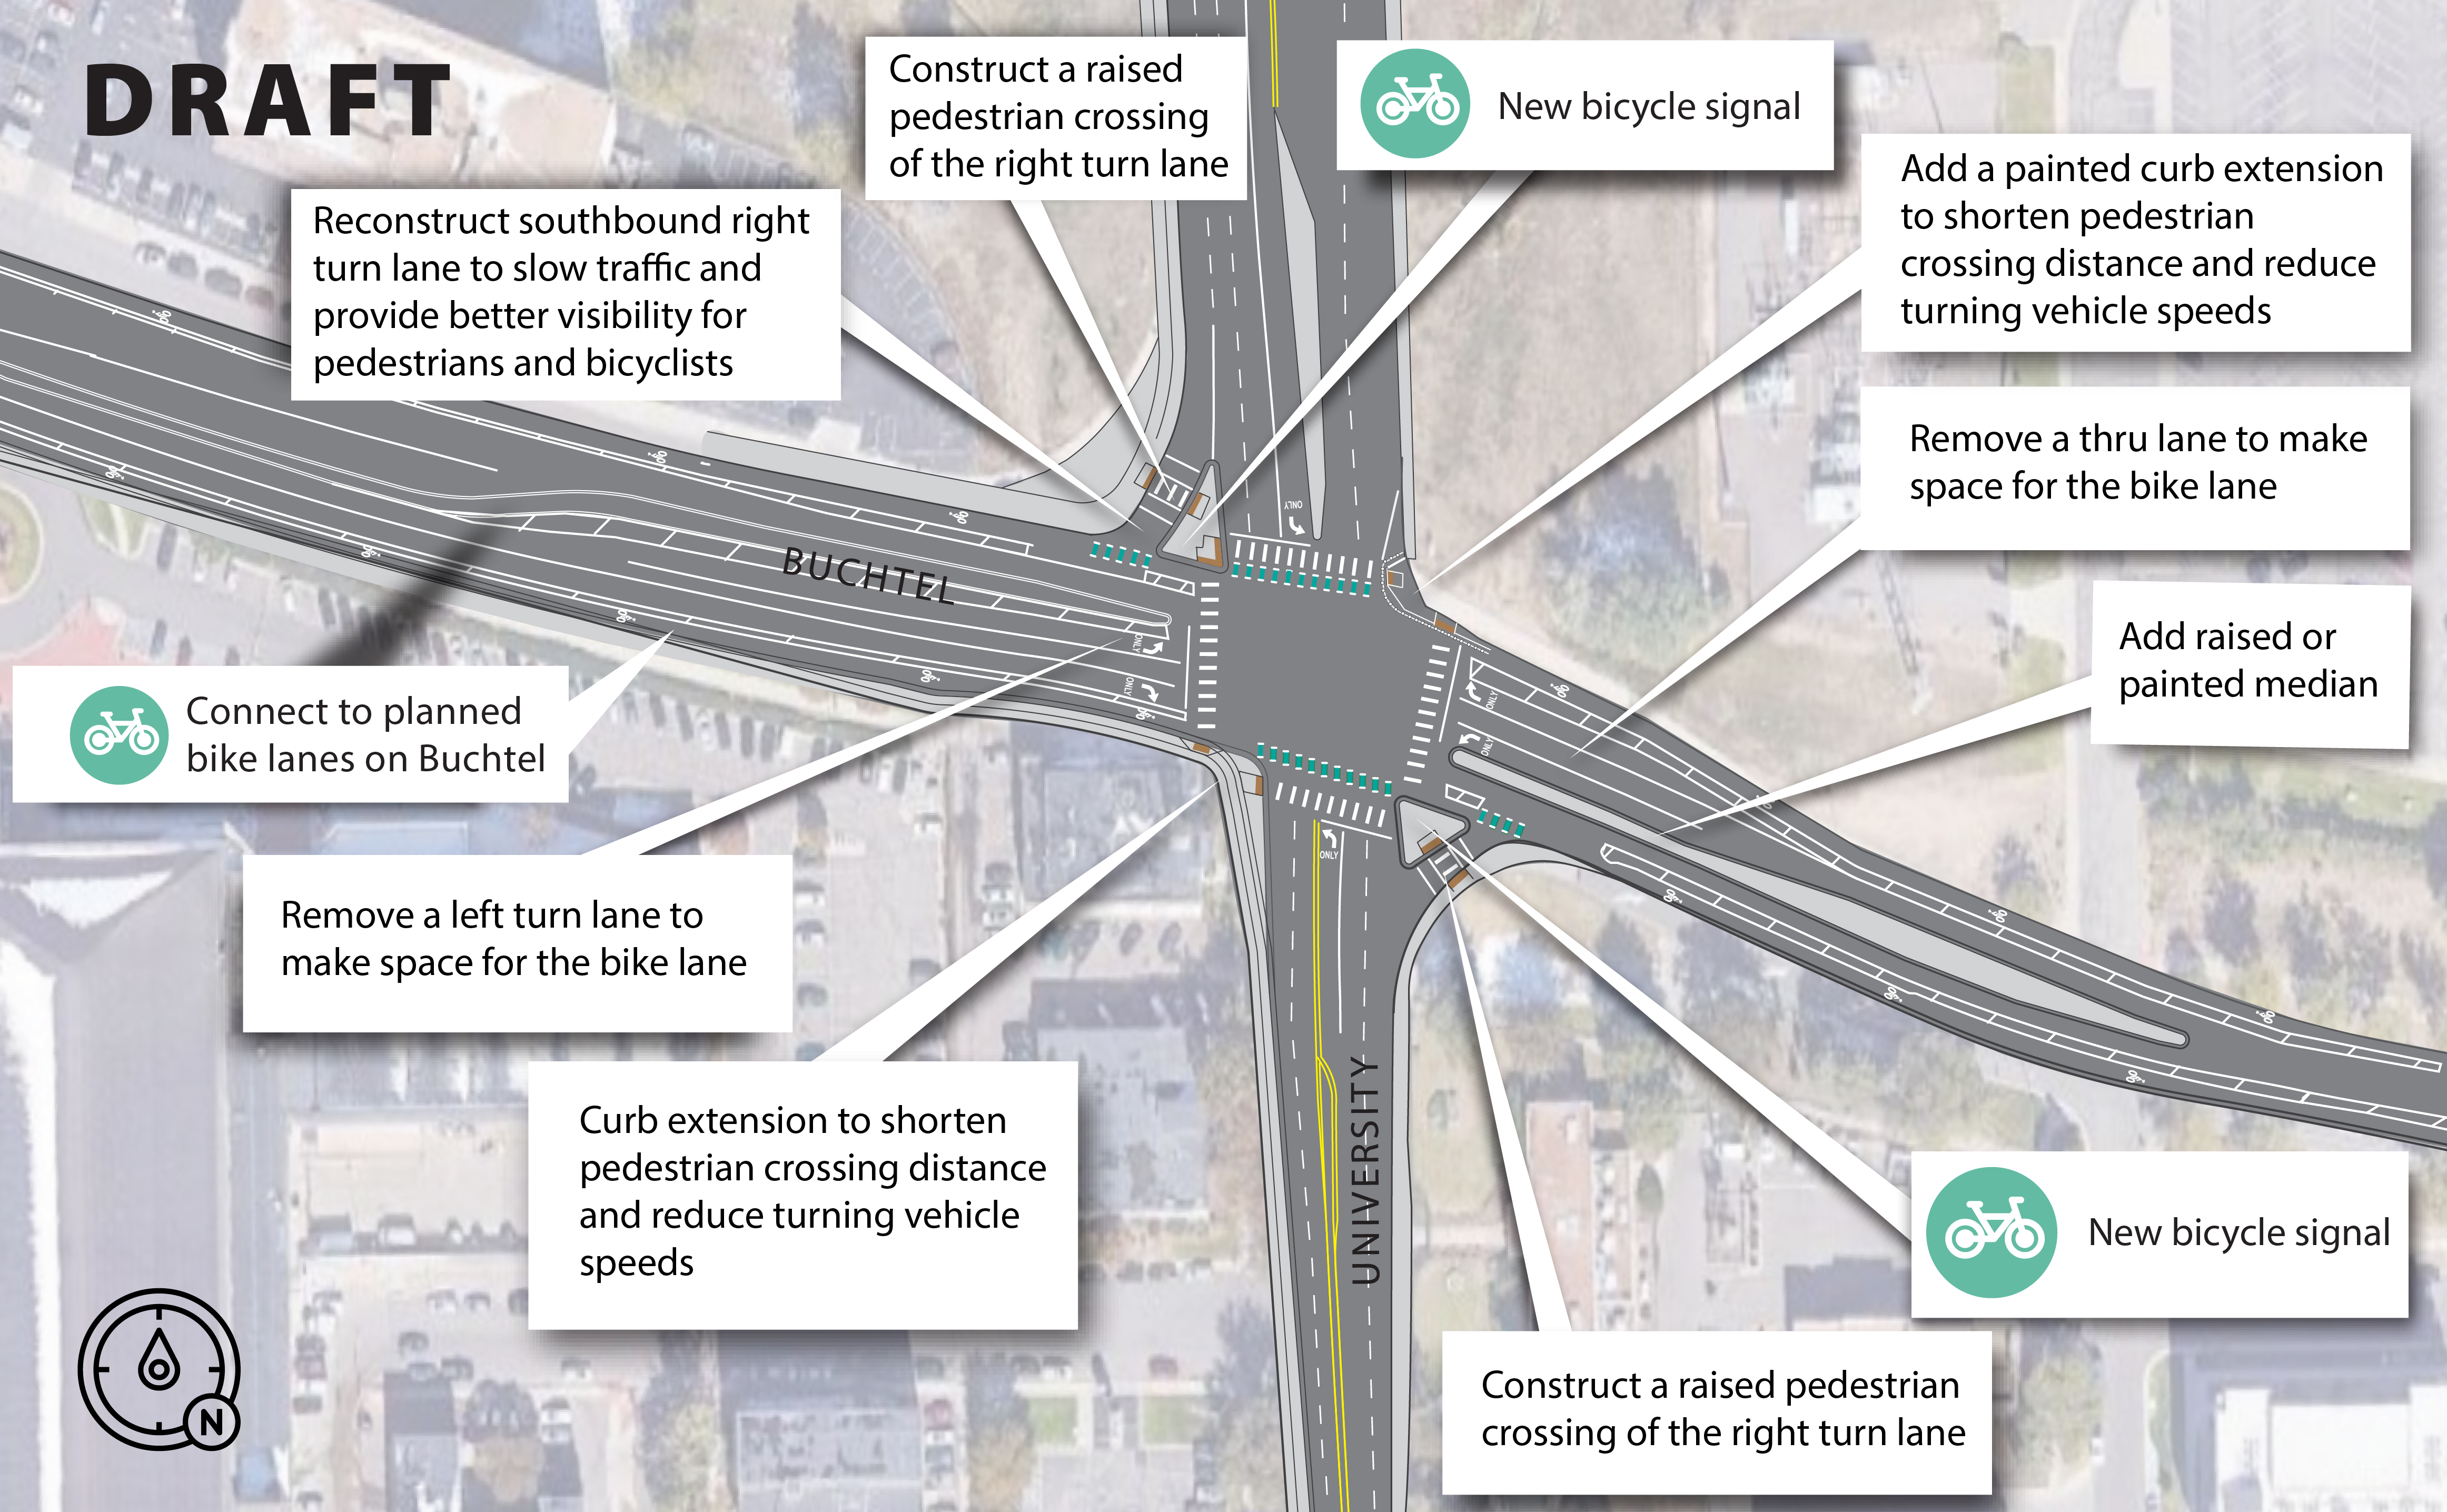 Illustration showing potential refinements for University & Buchtel Intersection improvements which include, reconstructing southbound right turn lane to slow traffic and provide better visibility for pedestrians and bicyclists, construct a raised pedestrian crossing of the right turn lane, new bicycle signal, Add raised or painted median, Curb extension to shorten pedestrian crossing distance and reduce turning vehicle speeds